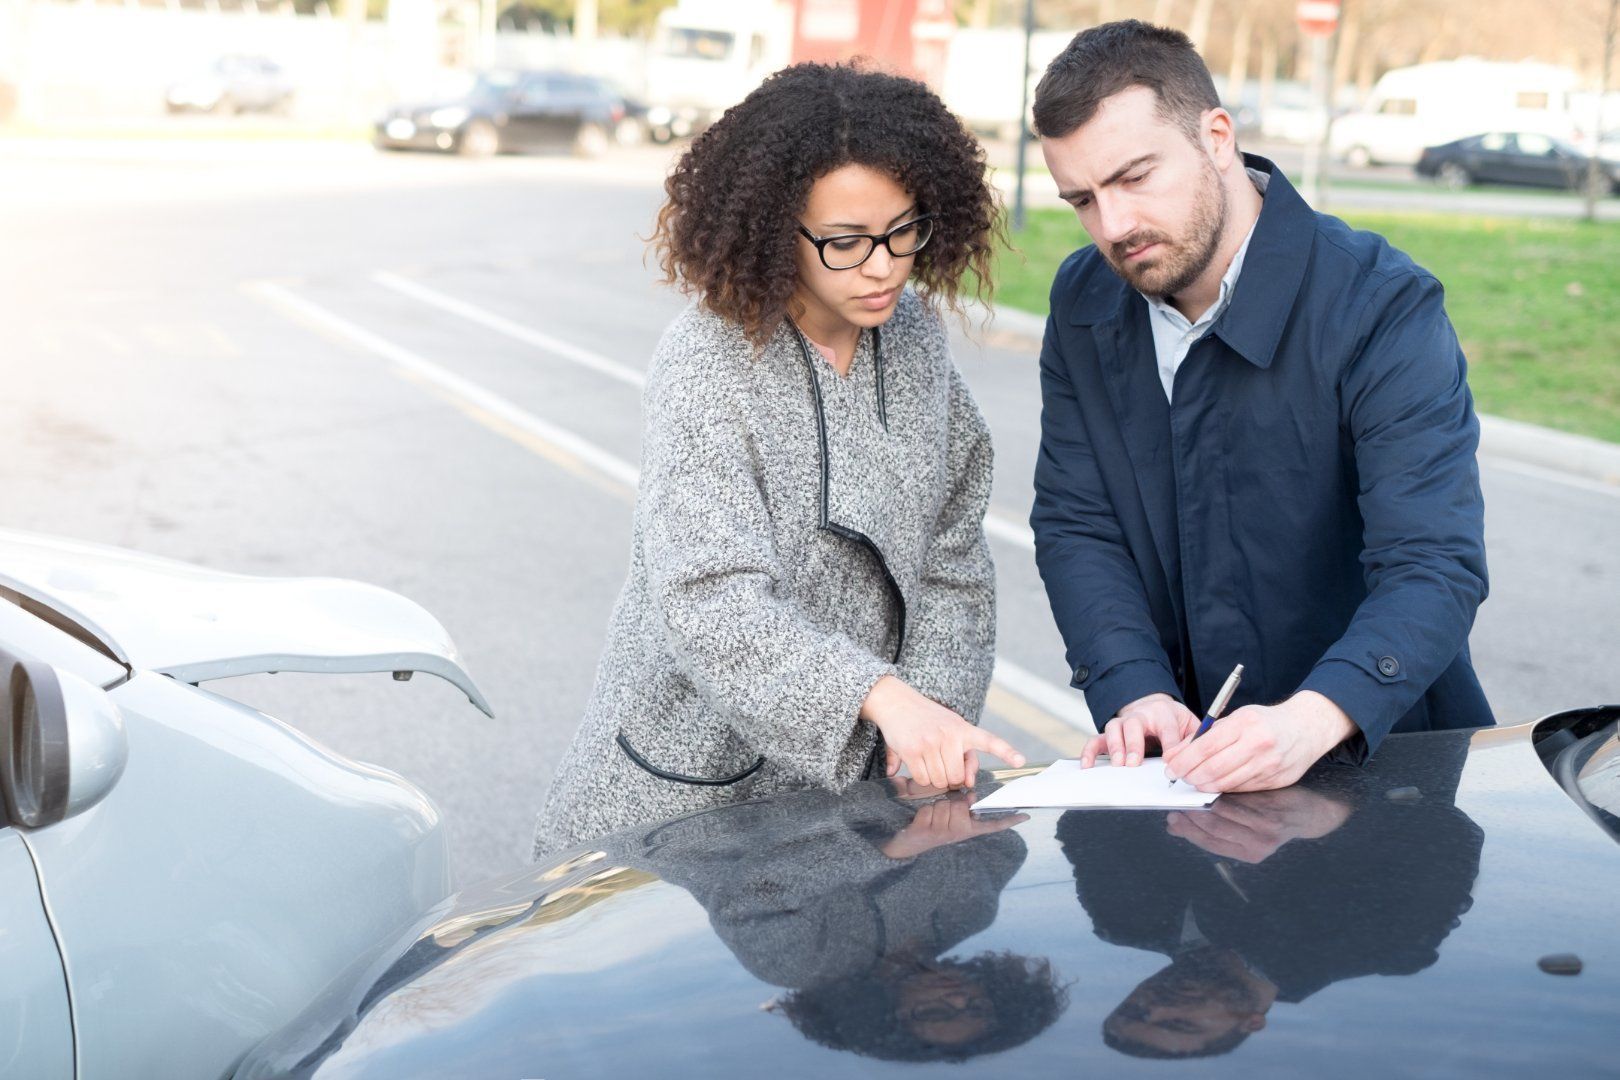 Should You Hire A Personal Injury Attorney For A Car Accident?